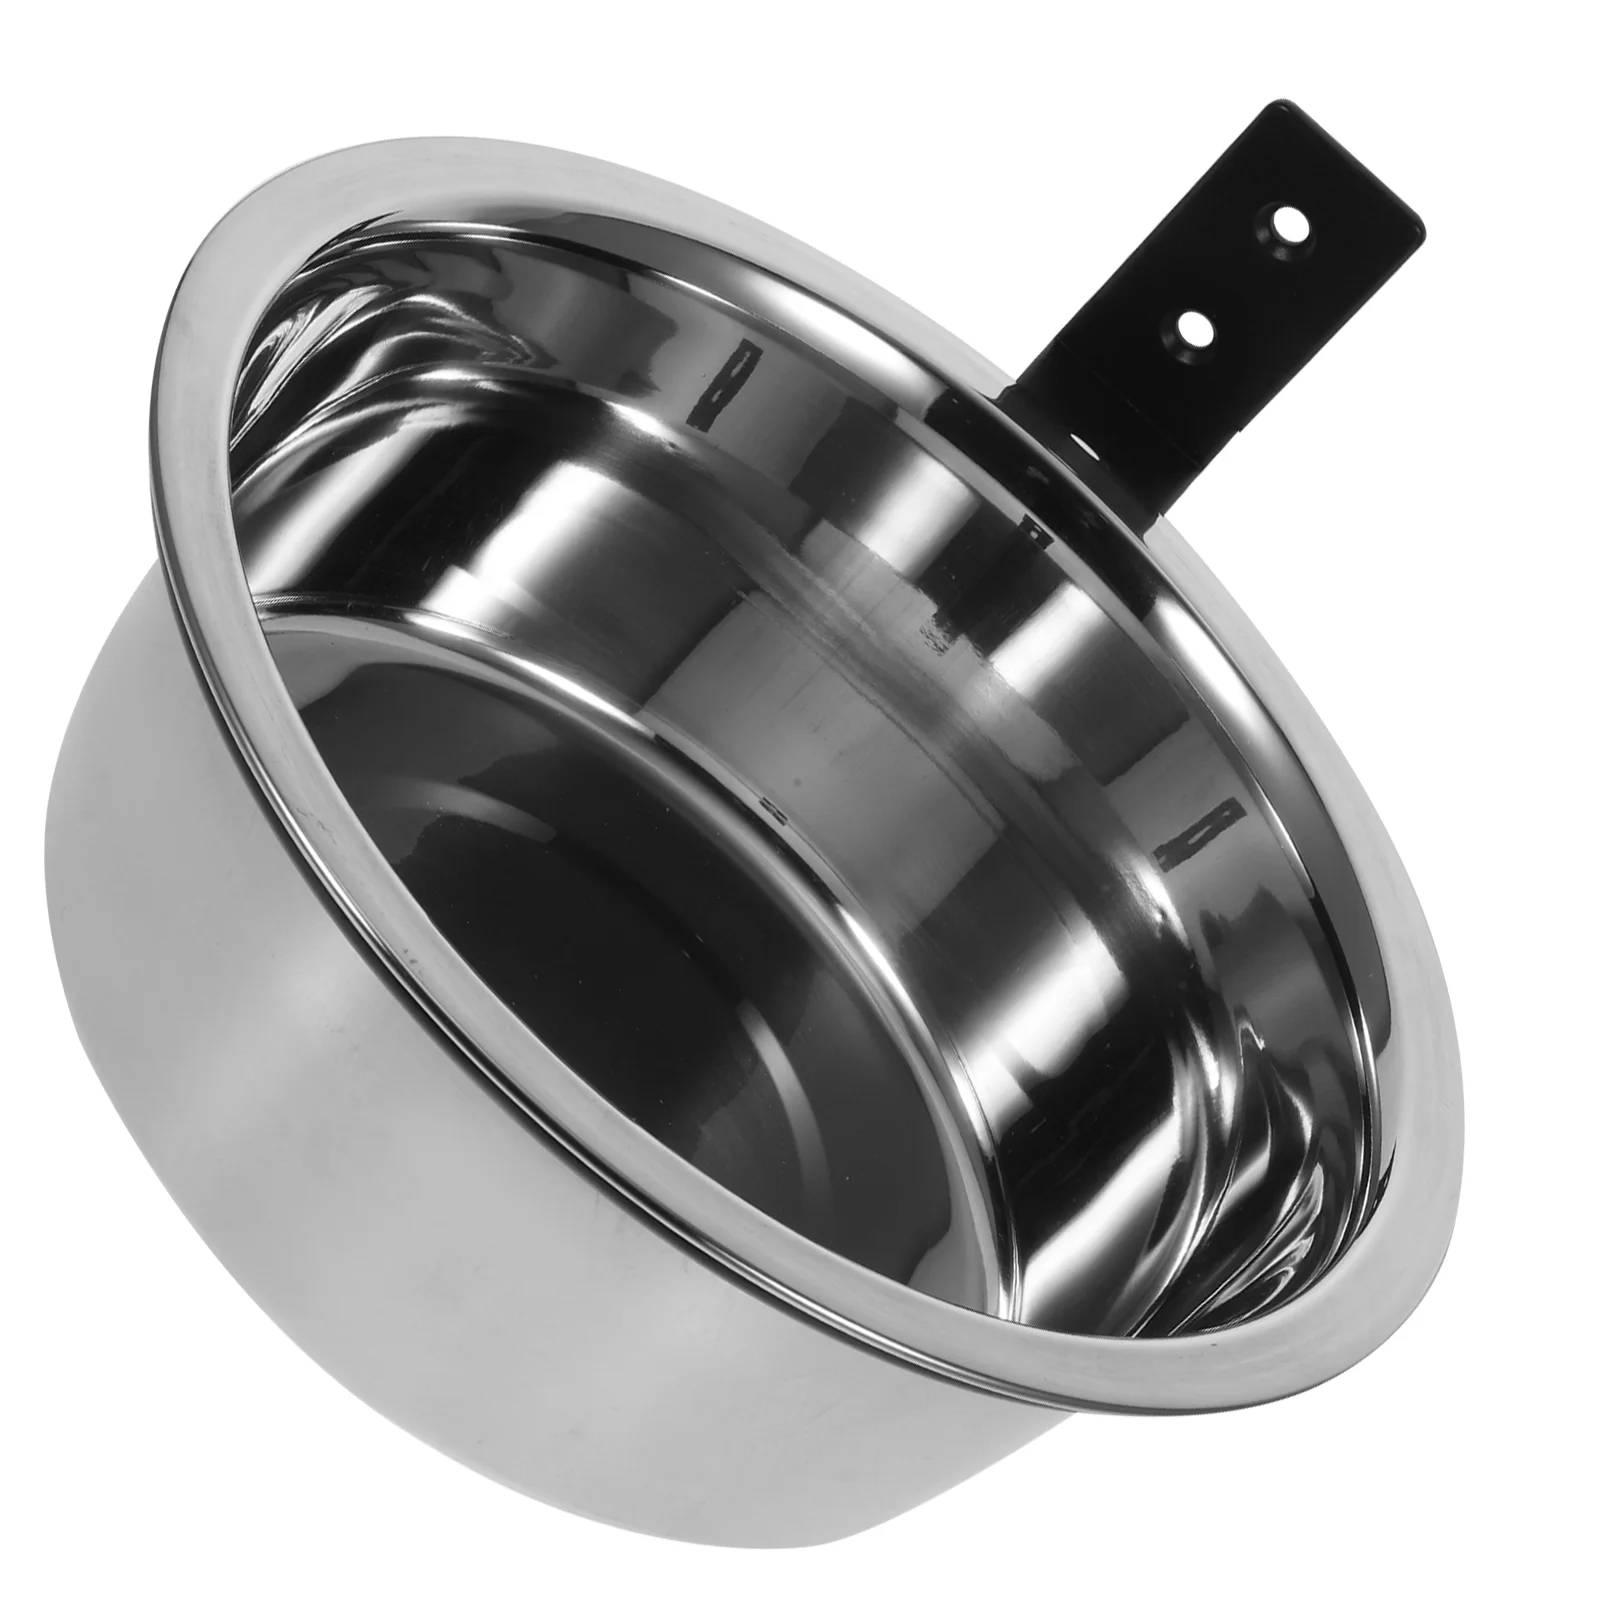 

Wall Mounted Elevated Dog Bowl Food Dispenser Water Large Dogs Convenient Cat Raised Stainless Steel Kitten Small Bowls